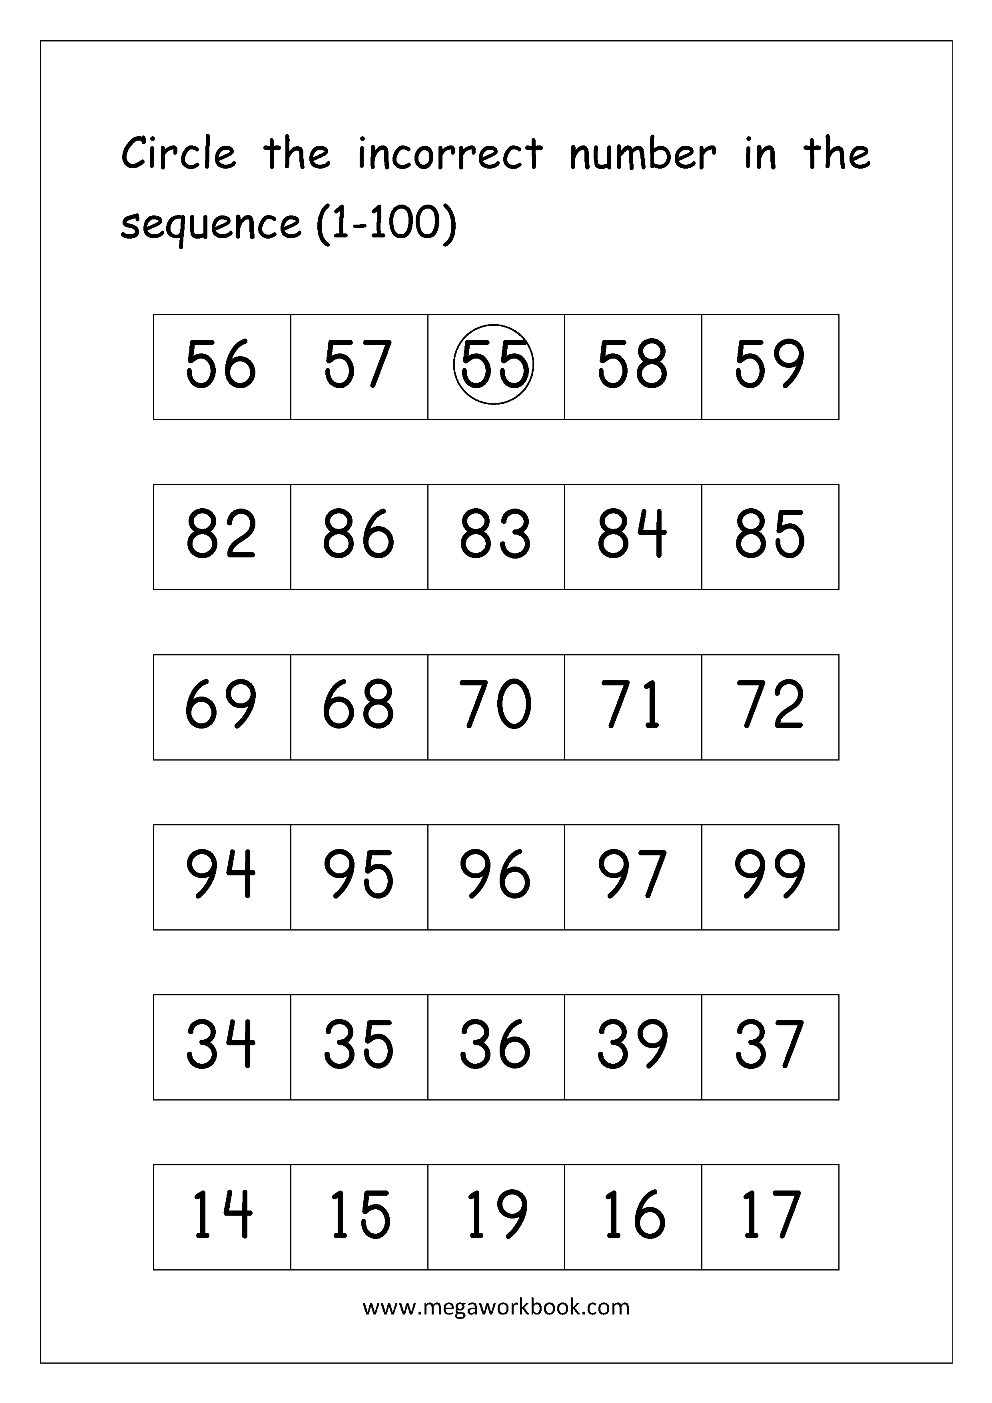 Ordering Numbers Worksheets, Missing Numbers, What comes before and